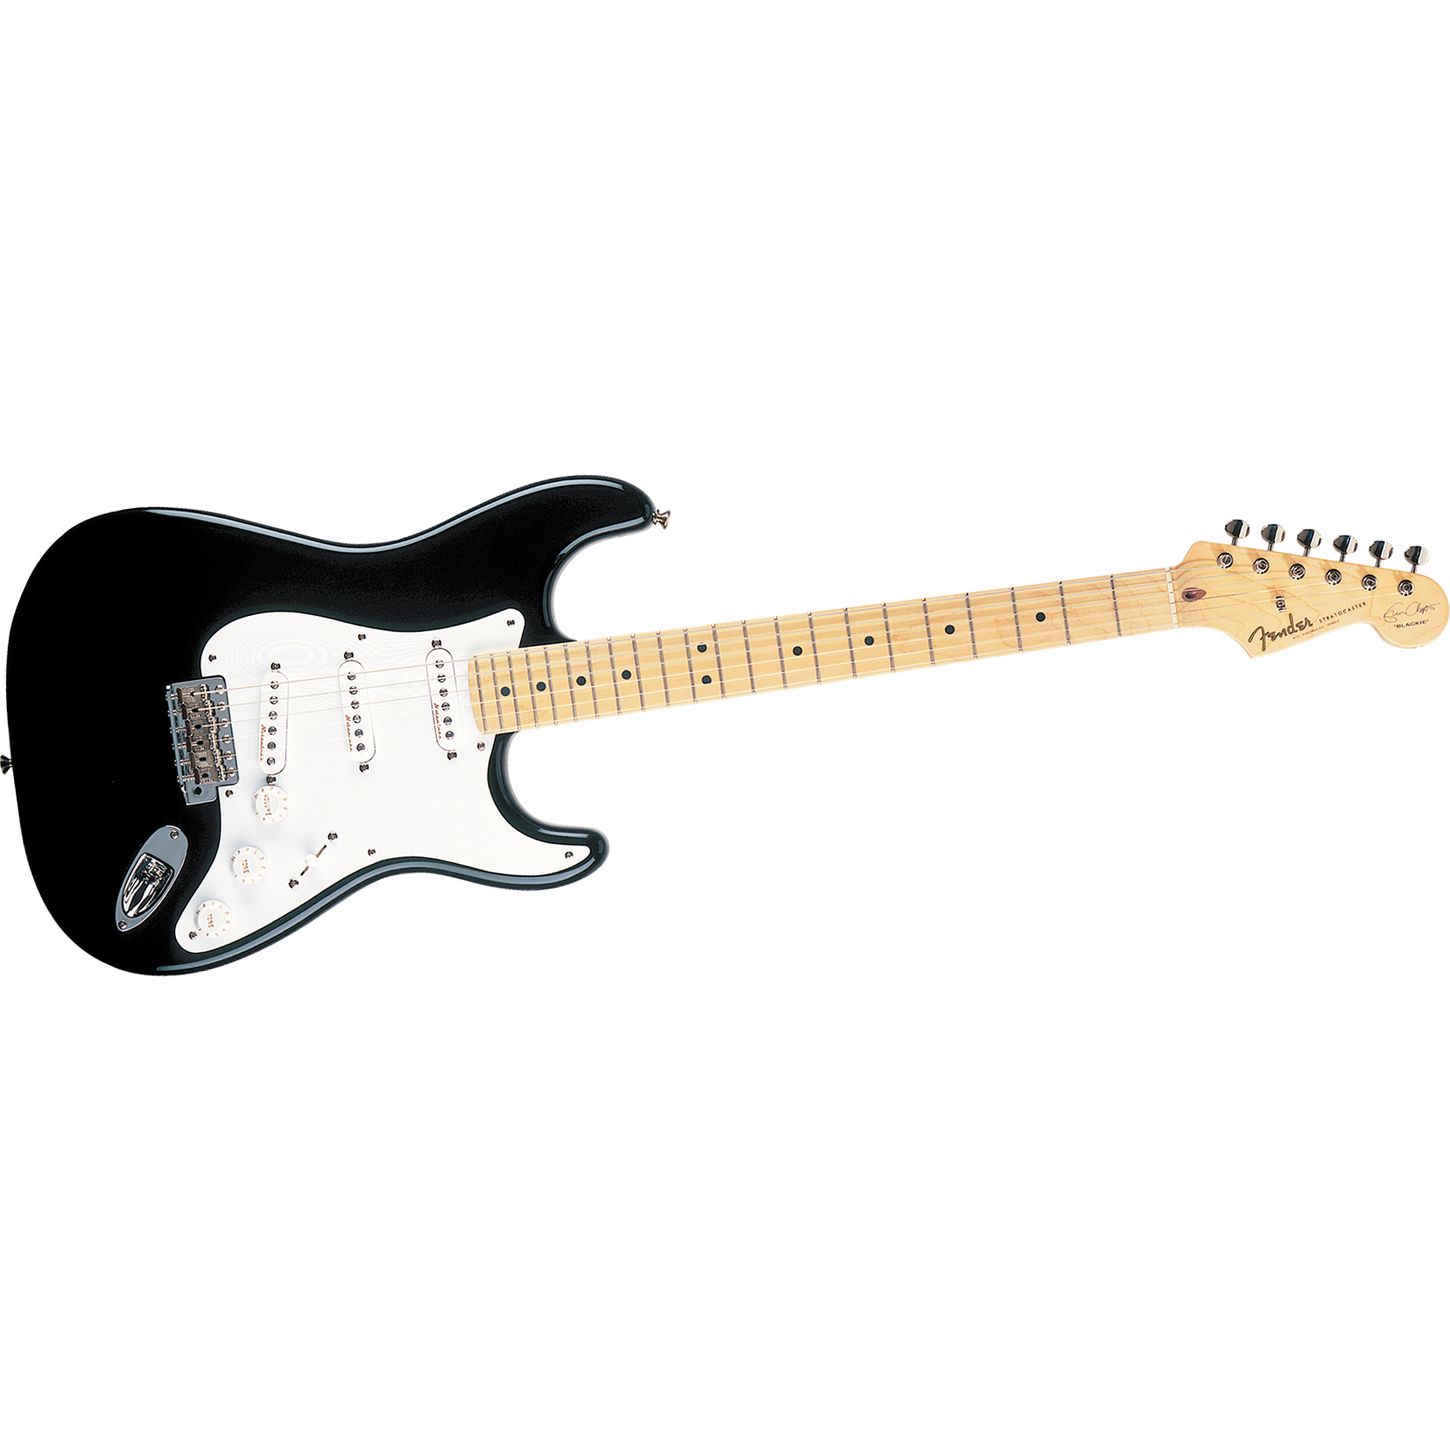 Guitar  black and white electric guitar black and white clipart 3